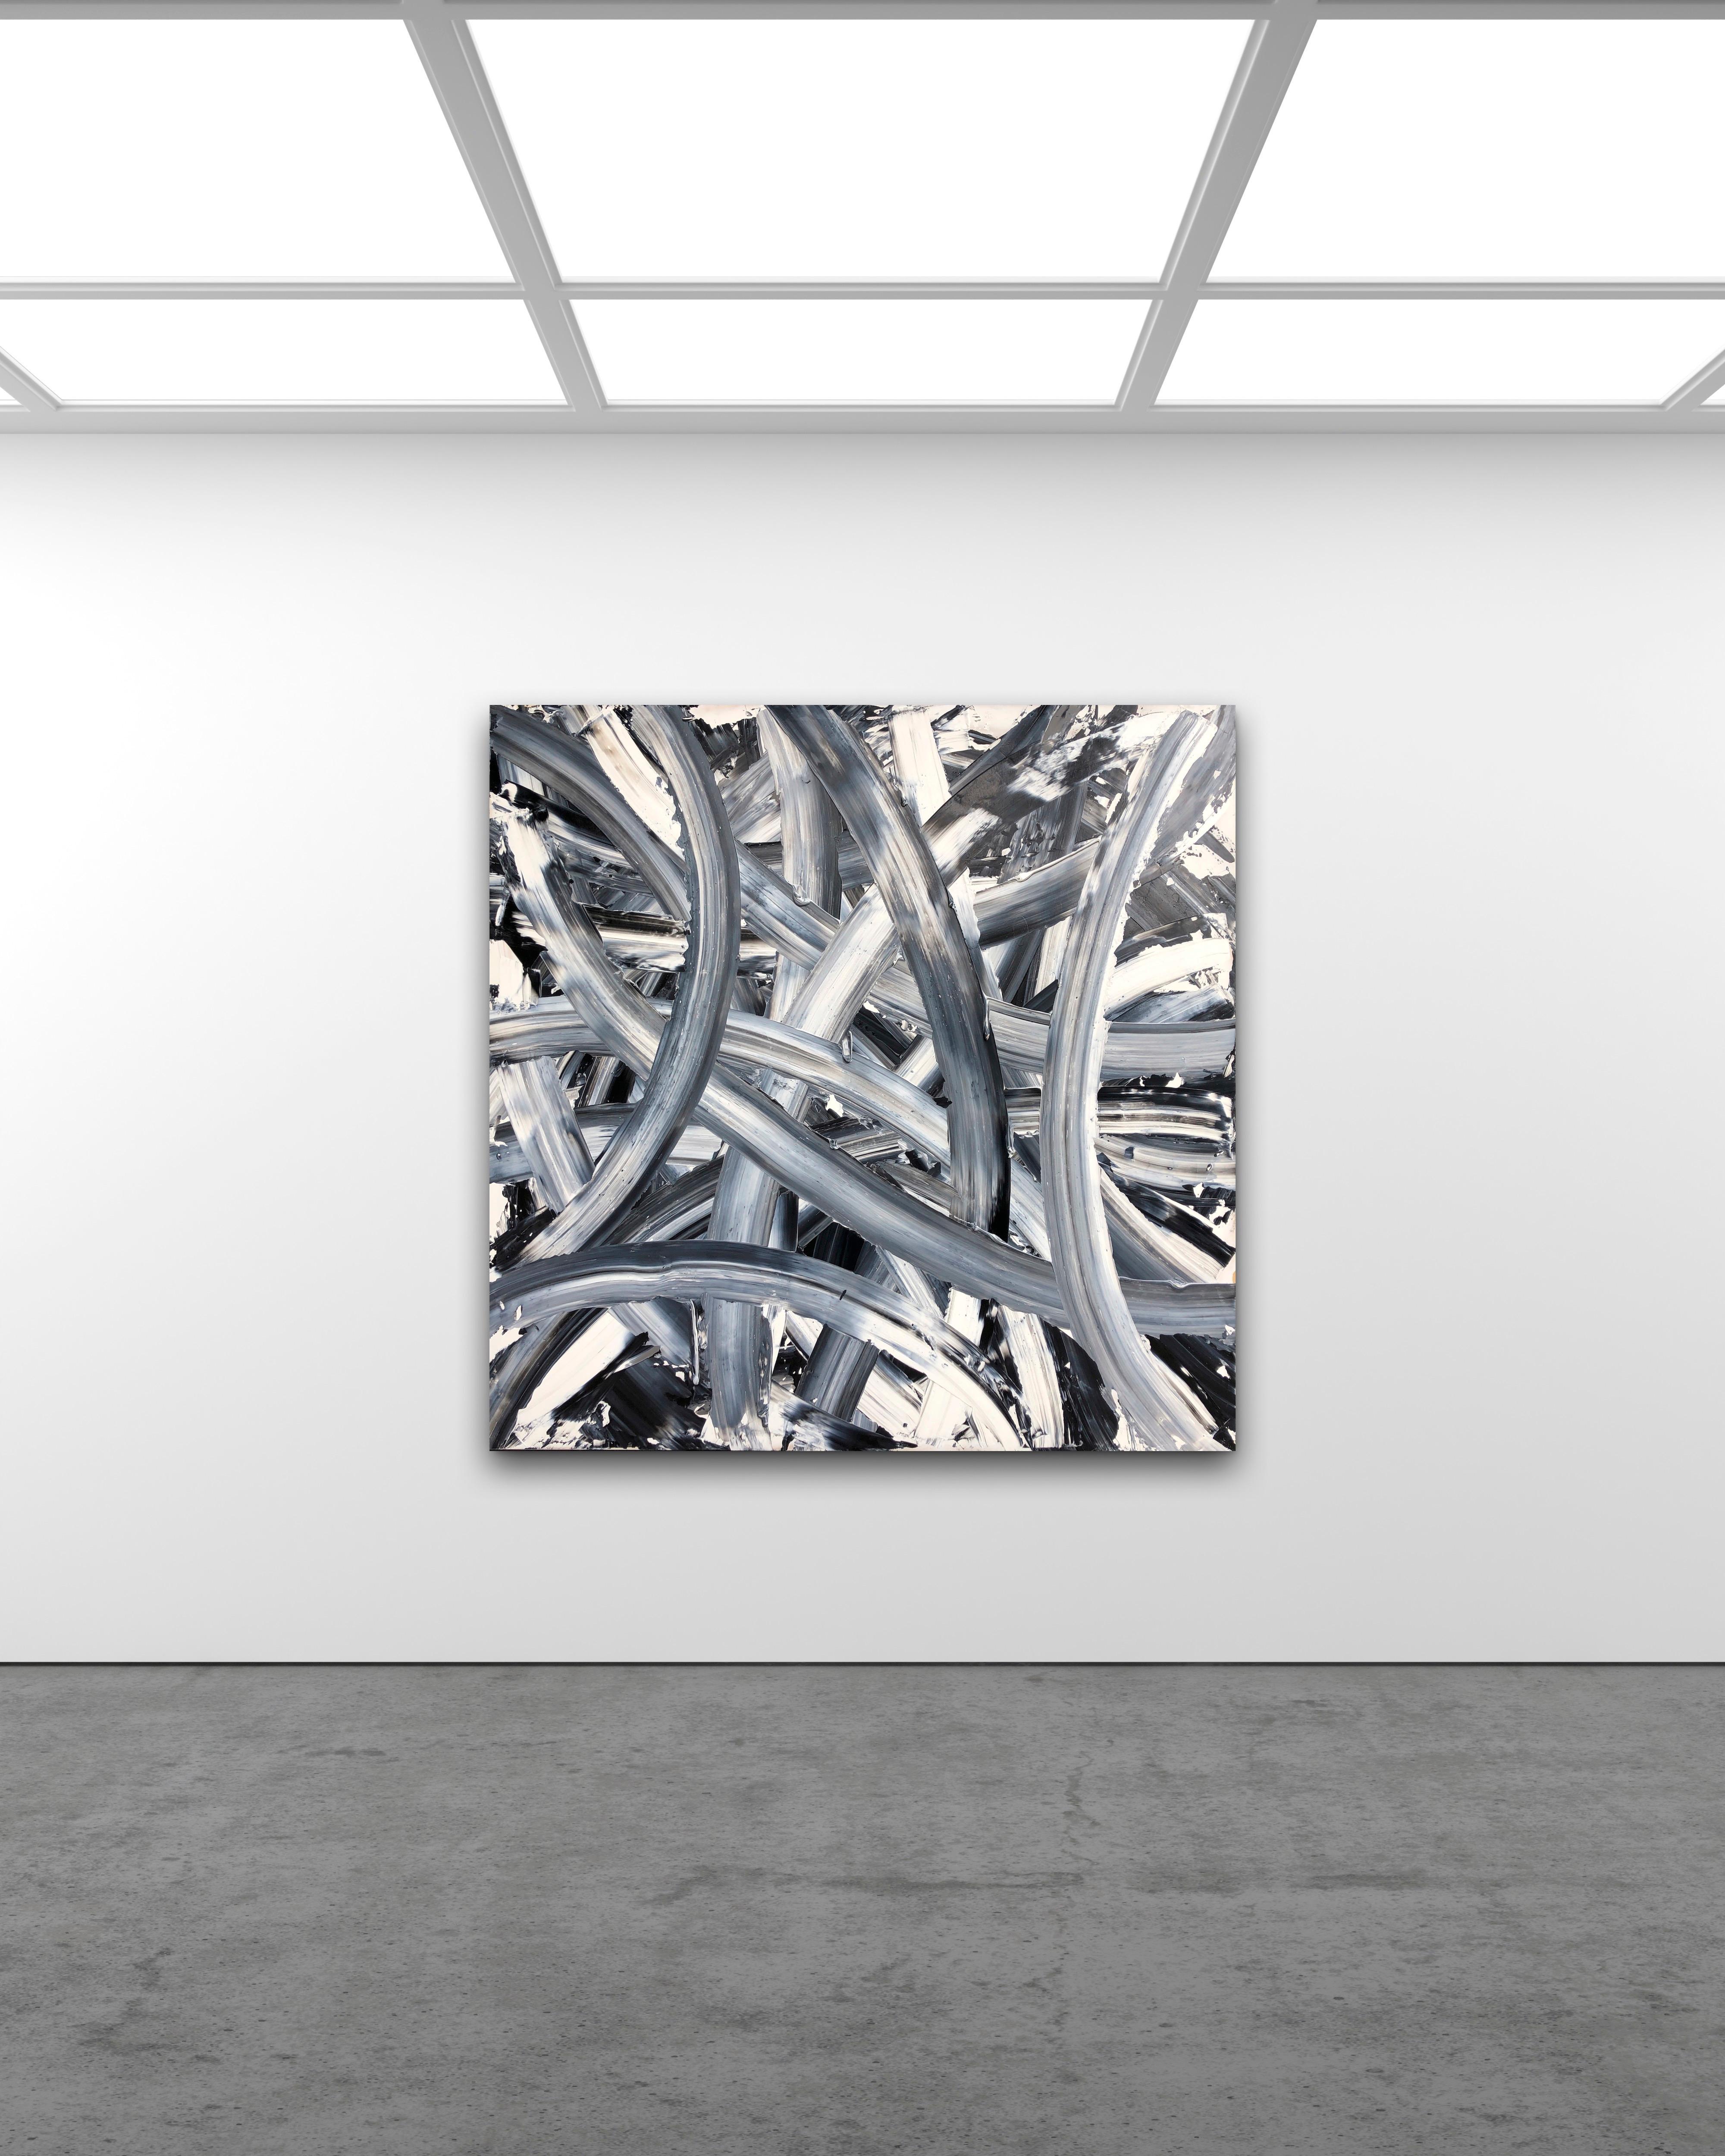 Endless Night was painted by Troy Smith in acrylic on a Birch panel. The long arching palette strokes reach from one edge of the painting to the other. Blending only two colours, black and white. The long stretching palette work blends the two